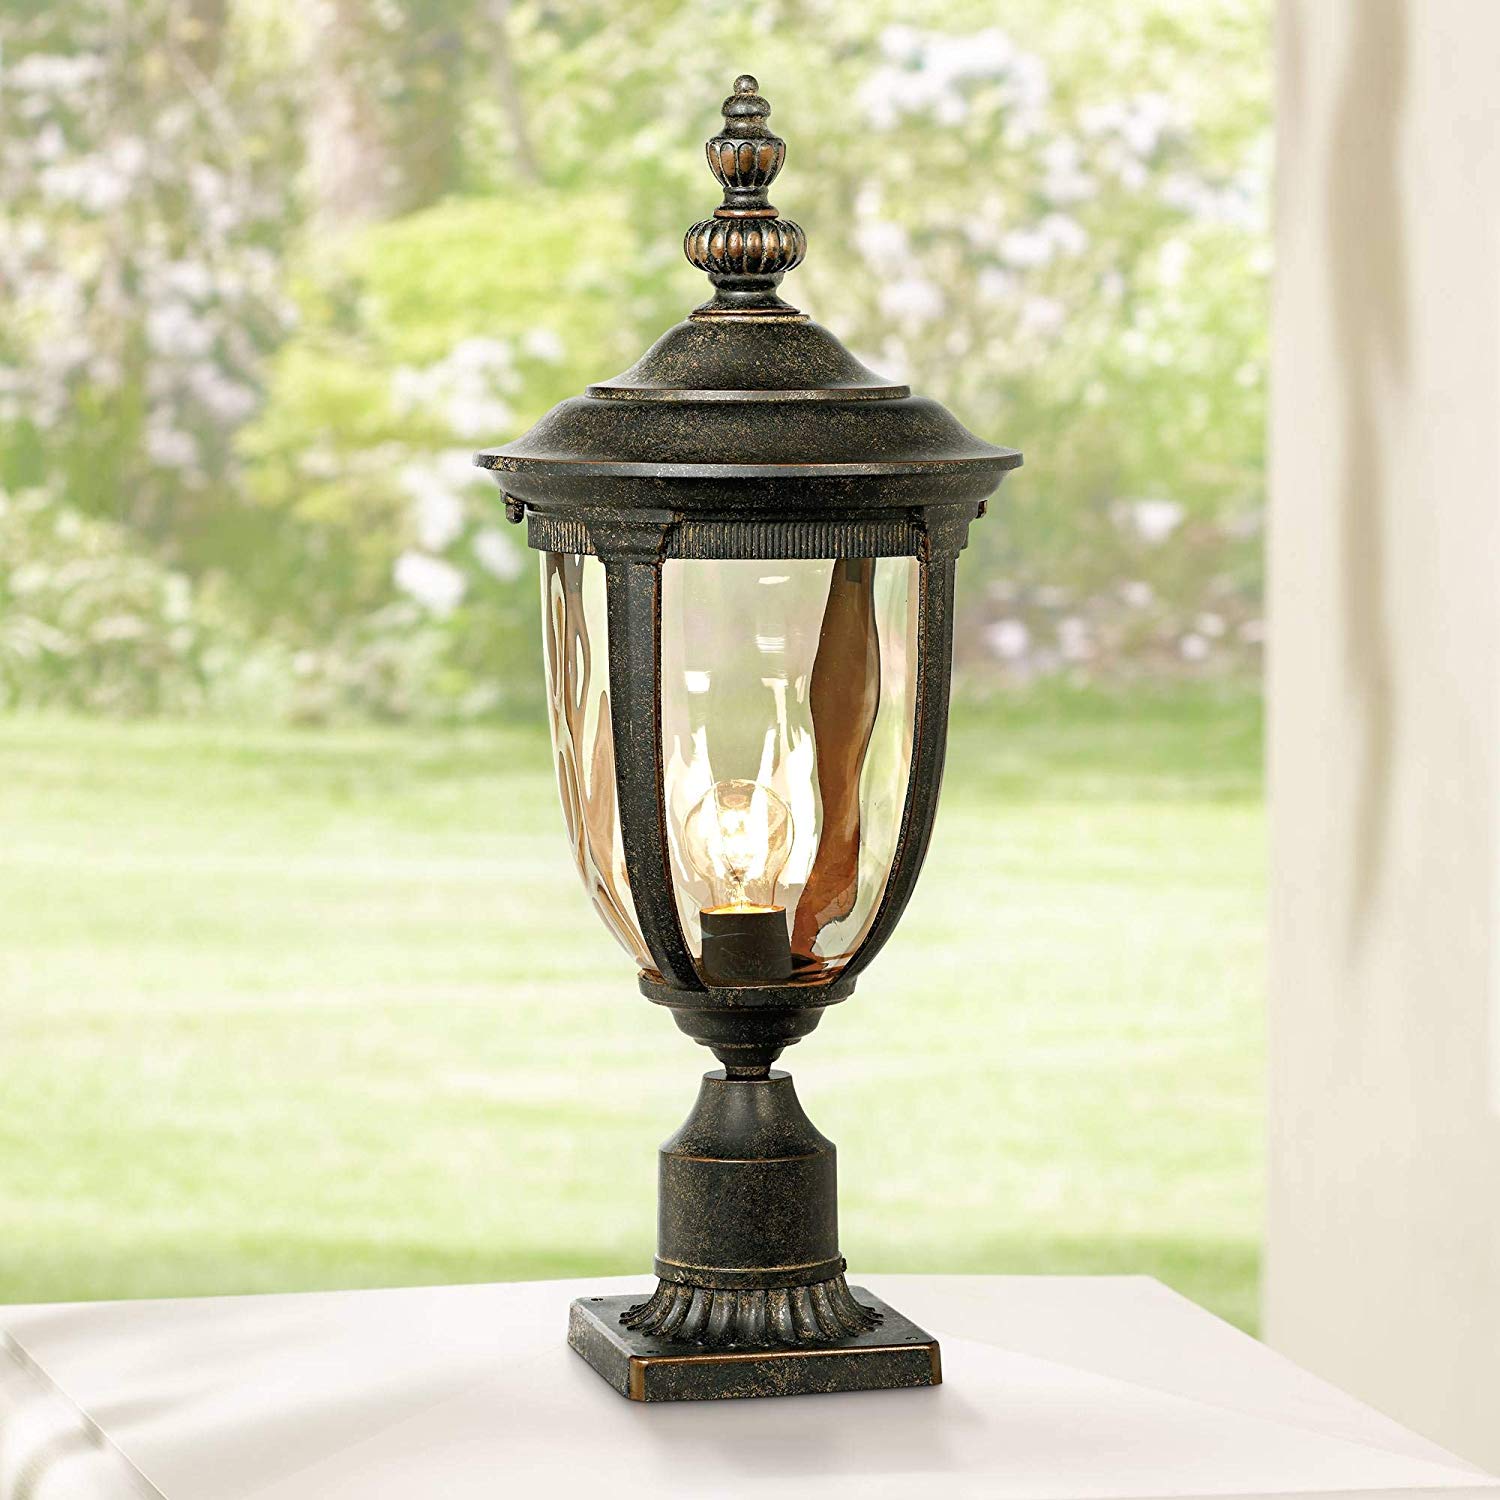 Bellagio Vintage Outdoor Post Light Bronze 25 inch Tall Fixture with Pier Mount for Deck Patio Entryway - John Timberland